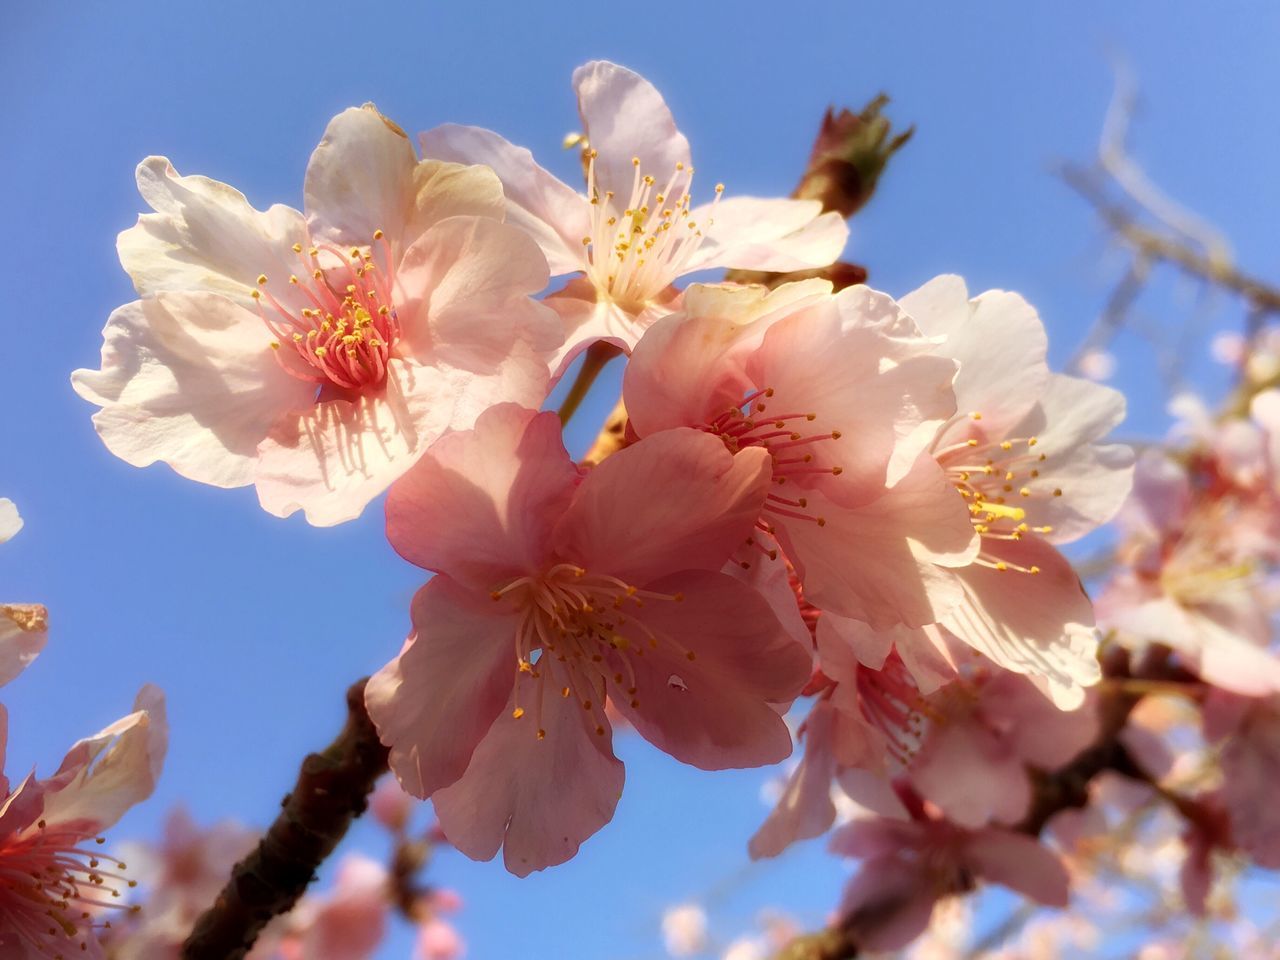 flower, freshness, branch, growth, low angle view, fragility, beauty in nature, cherry blossom, tree, nature, petal, blossom, cherry tree, close-up, blooming, in bloom, twig, sky, springtime, fruit tree